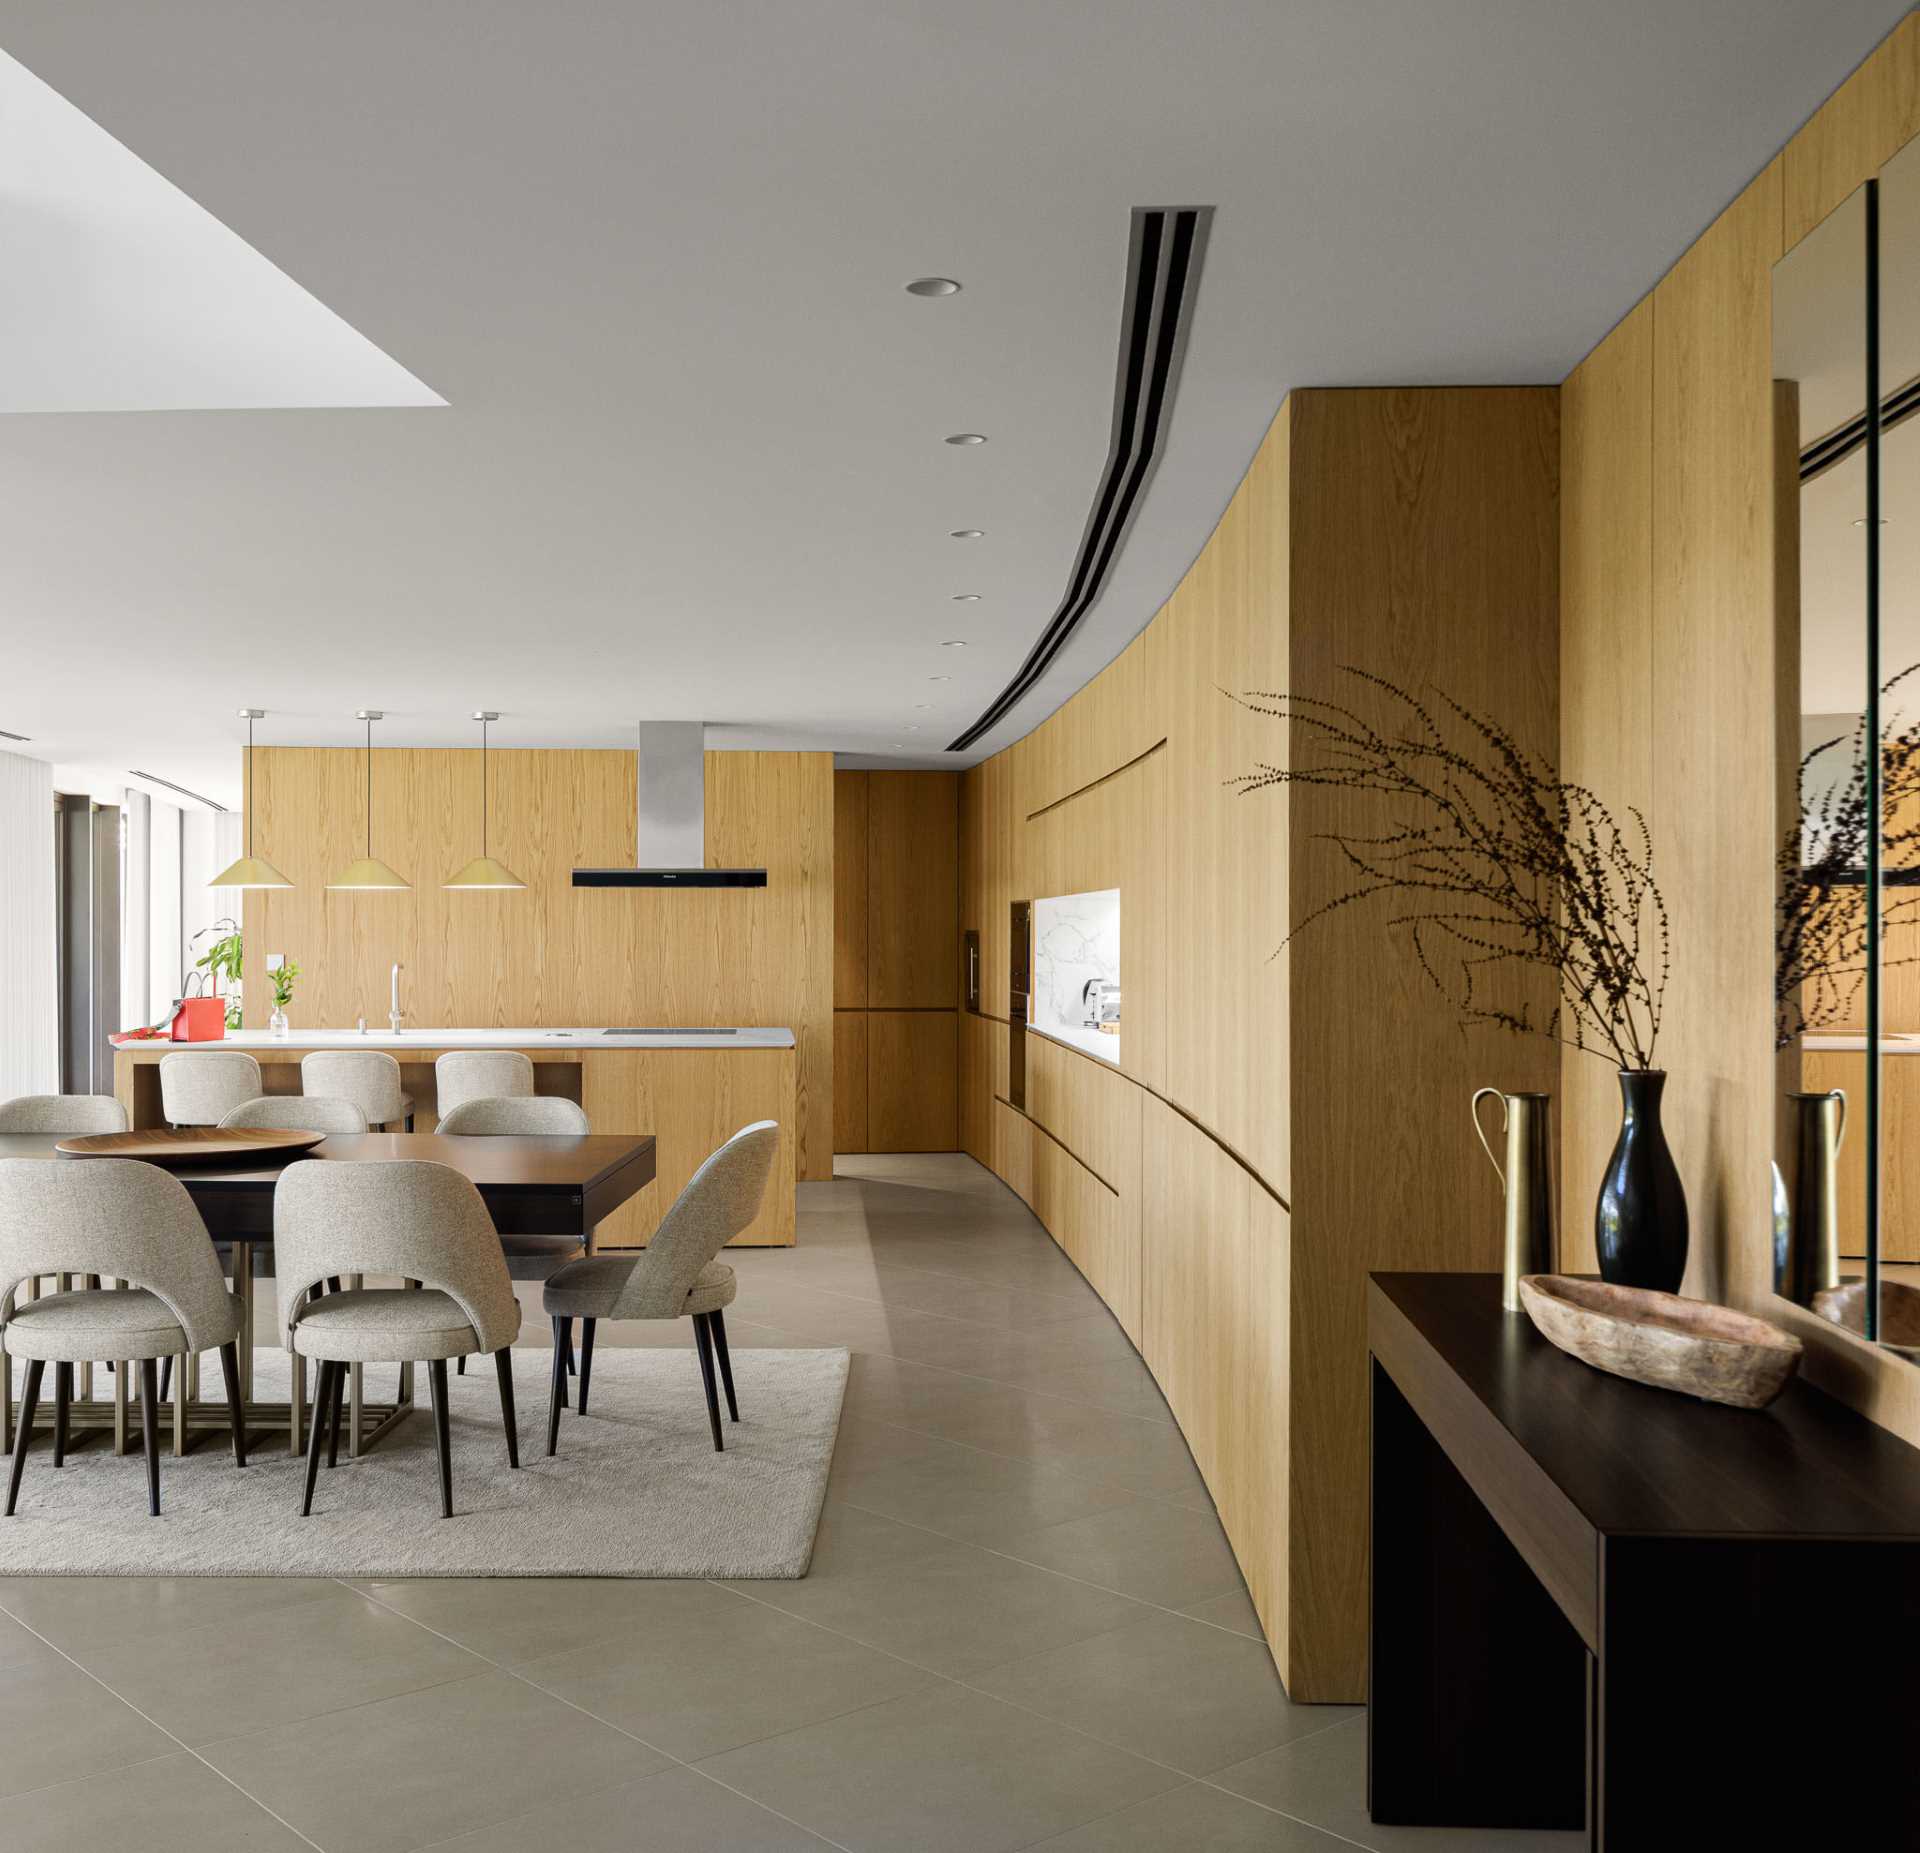 Warm wood walls and cabinets, and concrete floors connect the living room with the kitchen and dining area. The cabinetry that lines the wall also follows the curvature of the home.